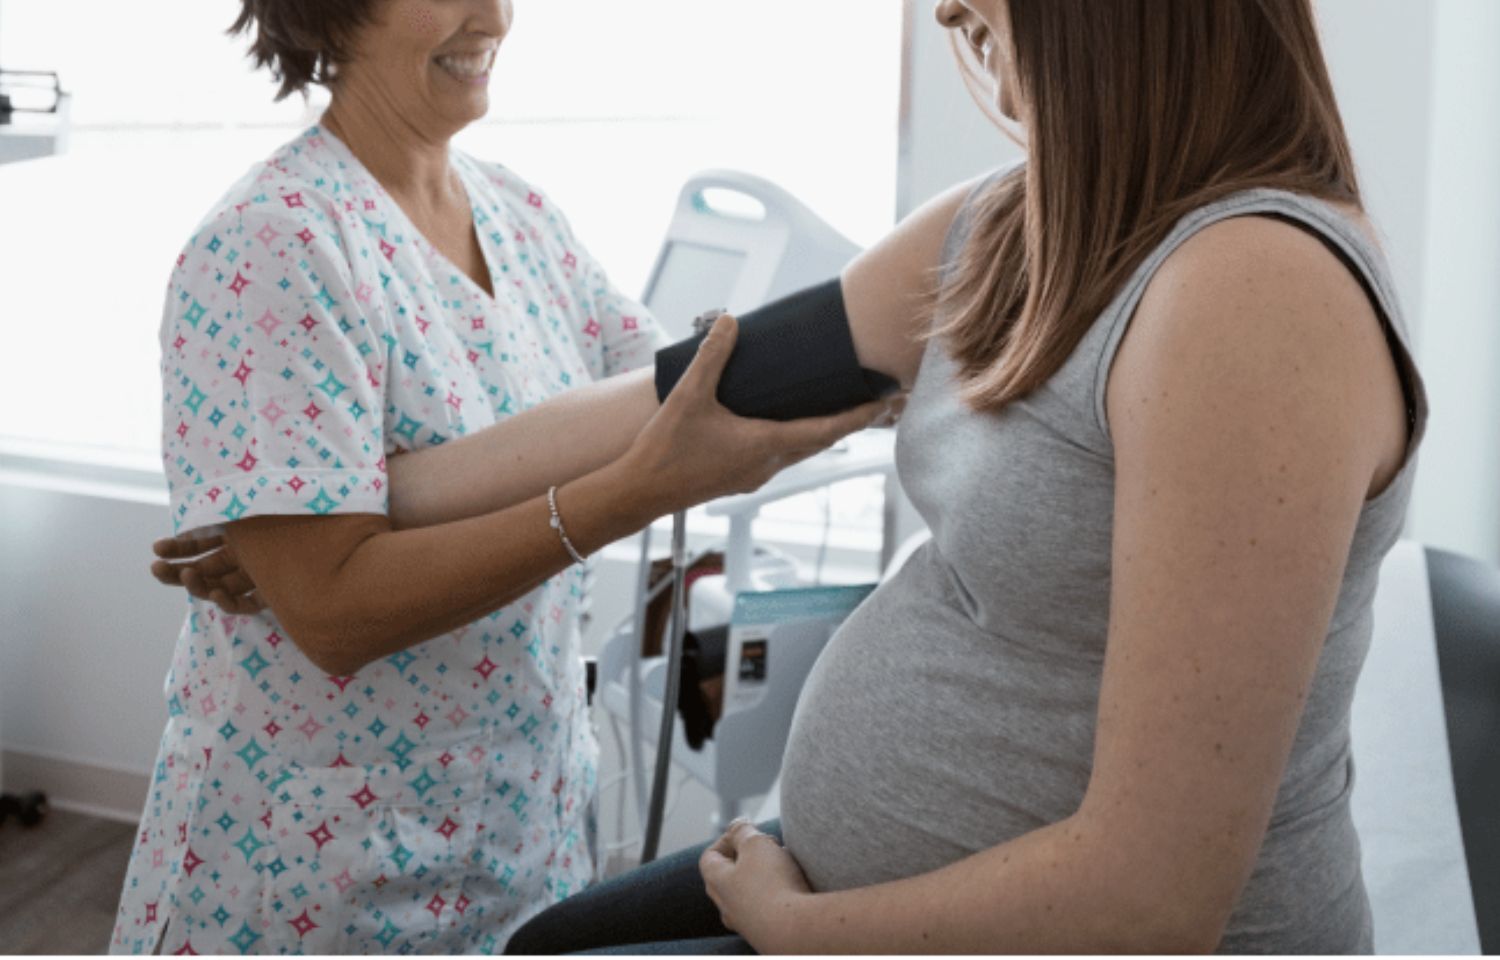 Frozen embryo transfer is associated with high blood pressure risk during pregnancy